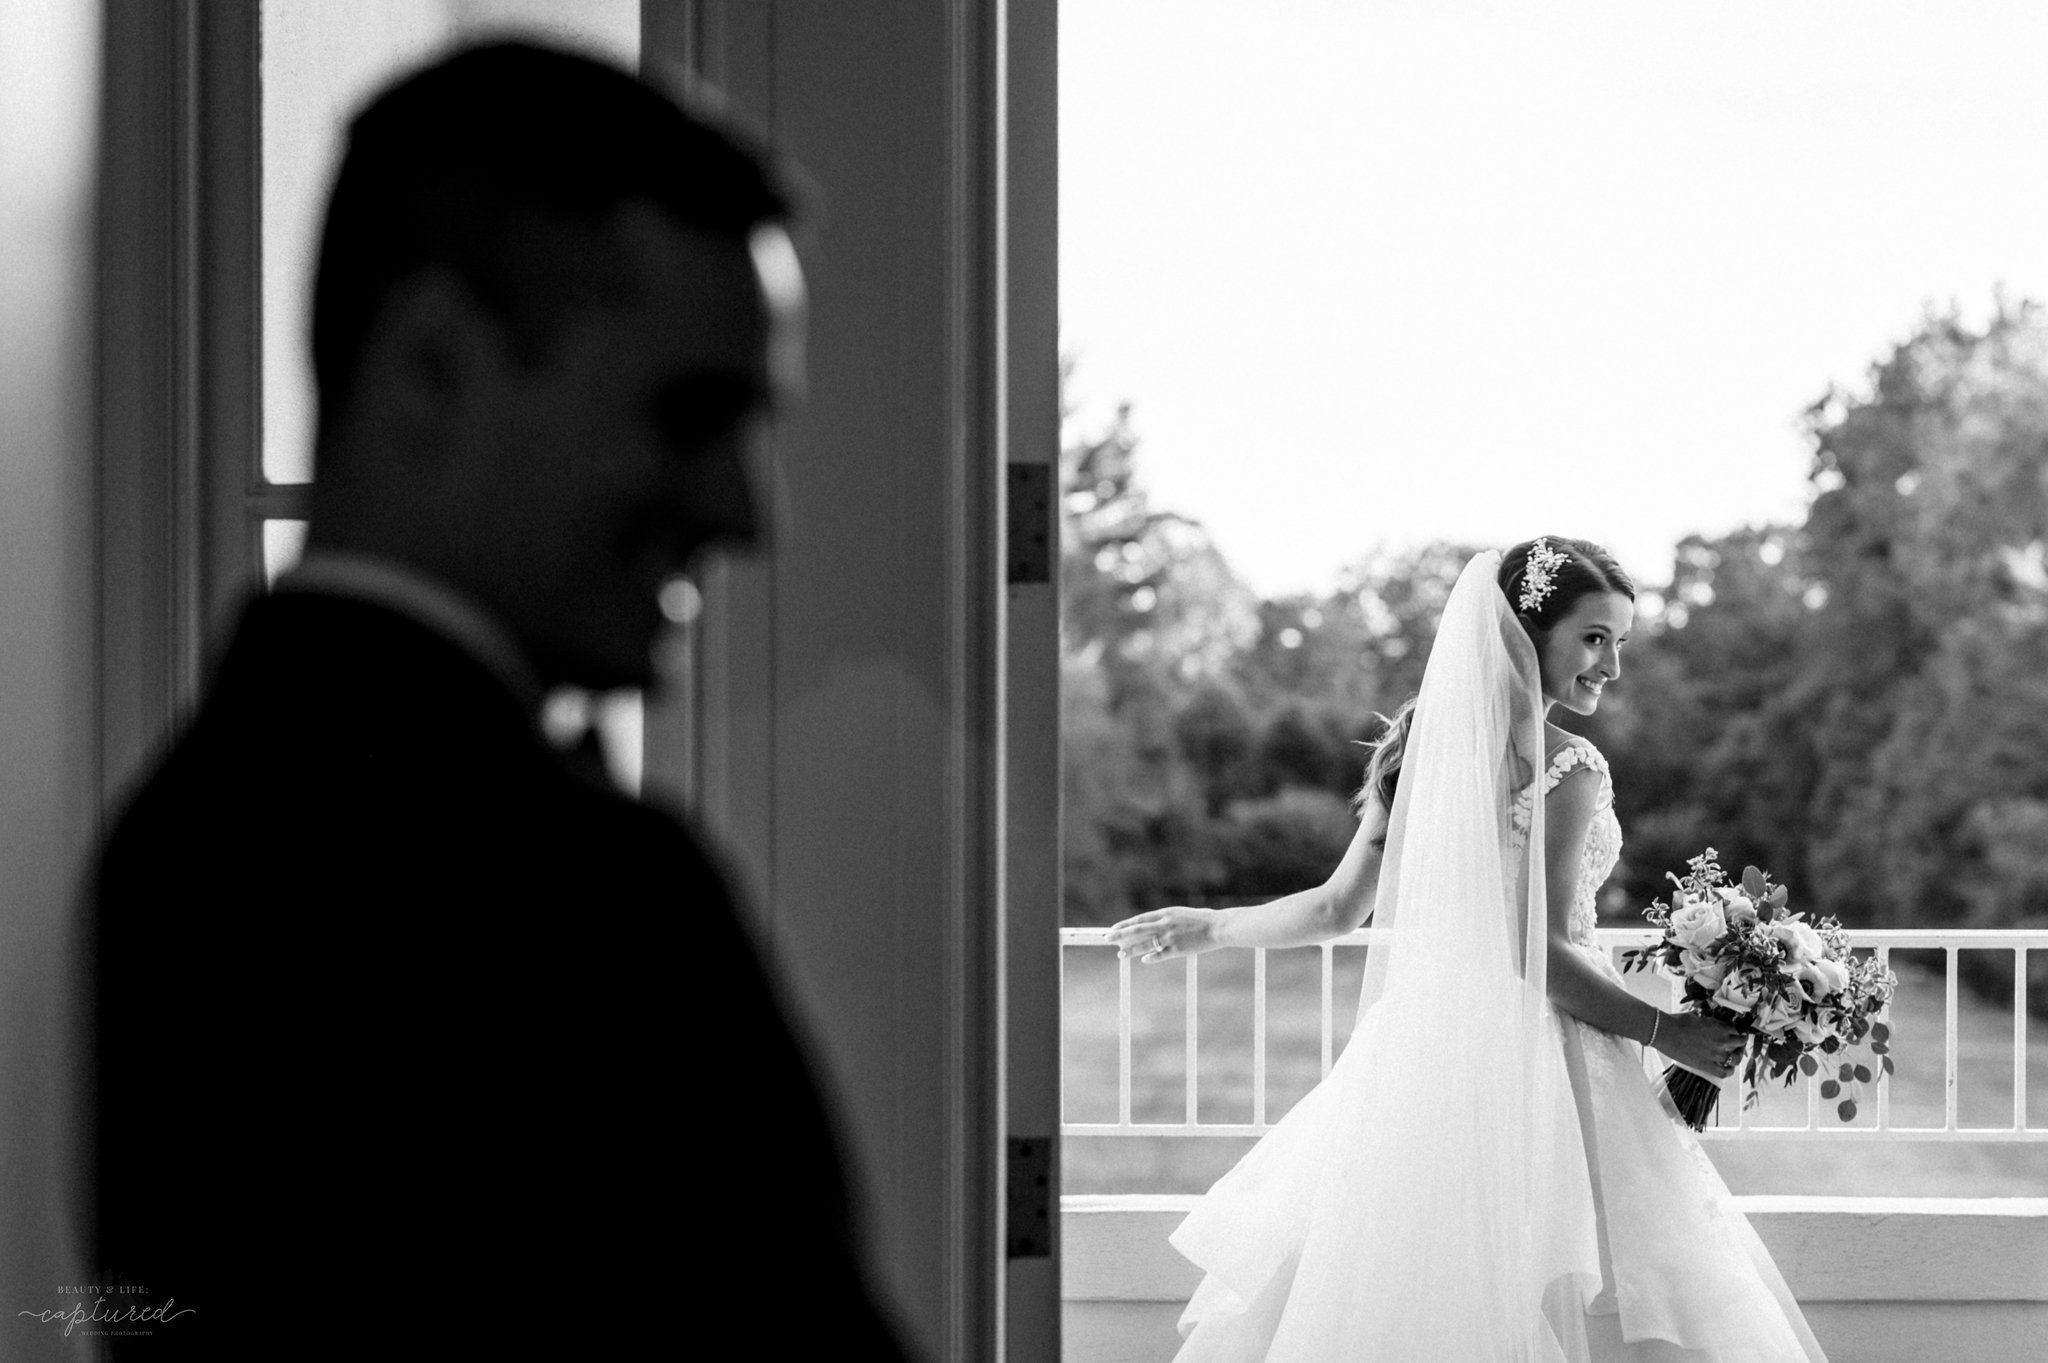 Beauty_and_Life_Captured_Danielle_and_Javier_Wedding_test-94.jpg